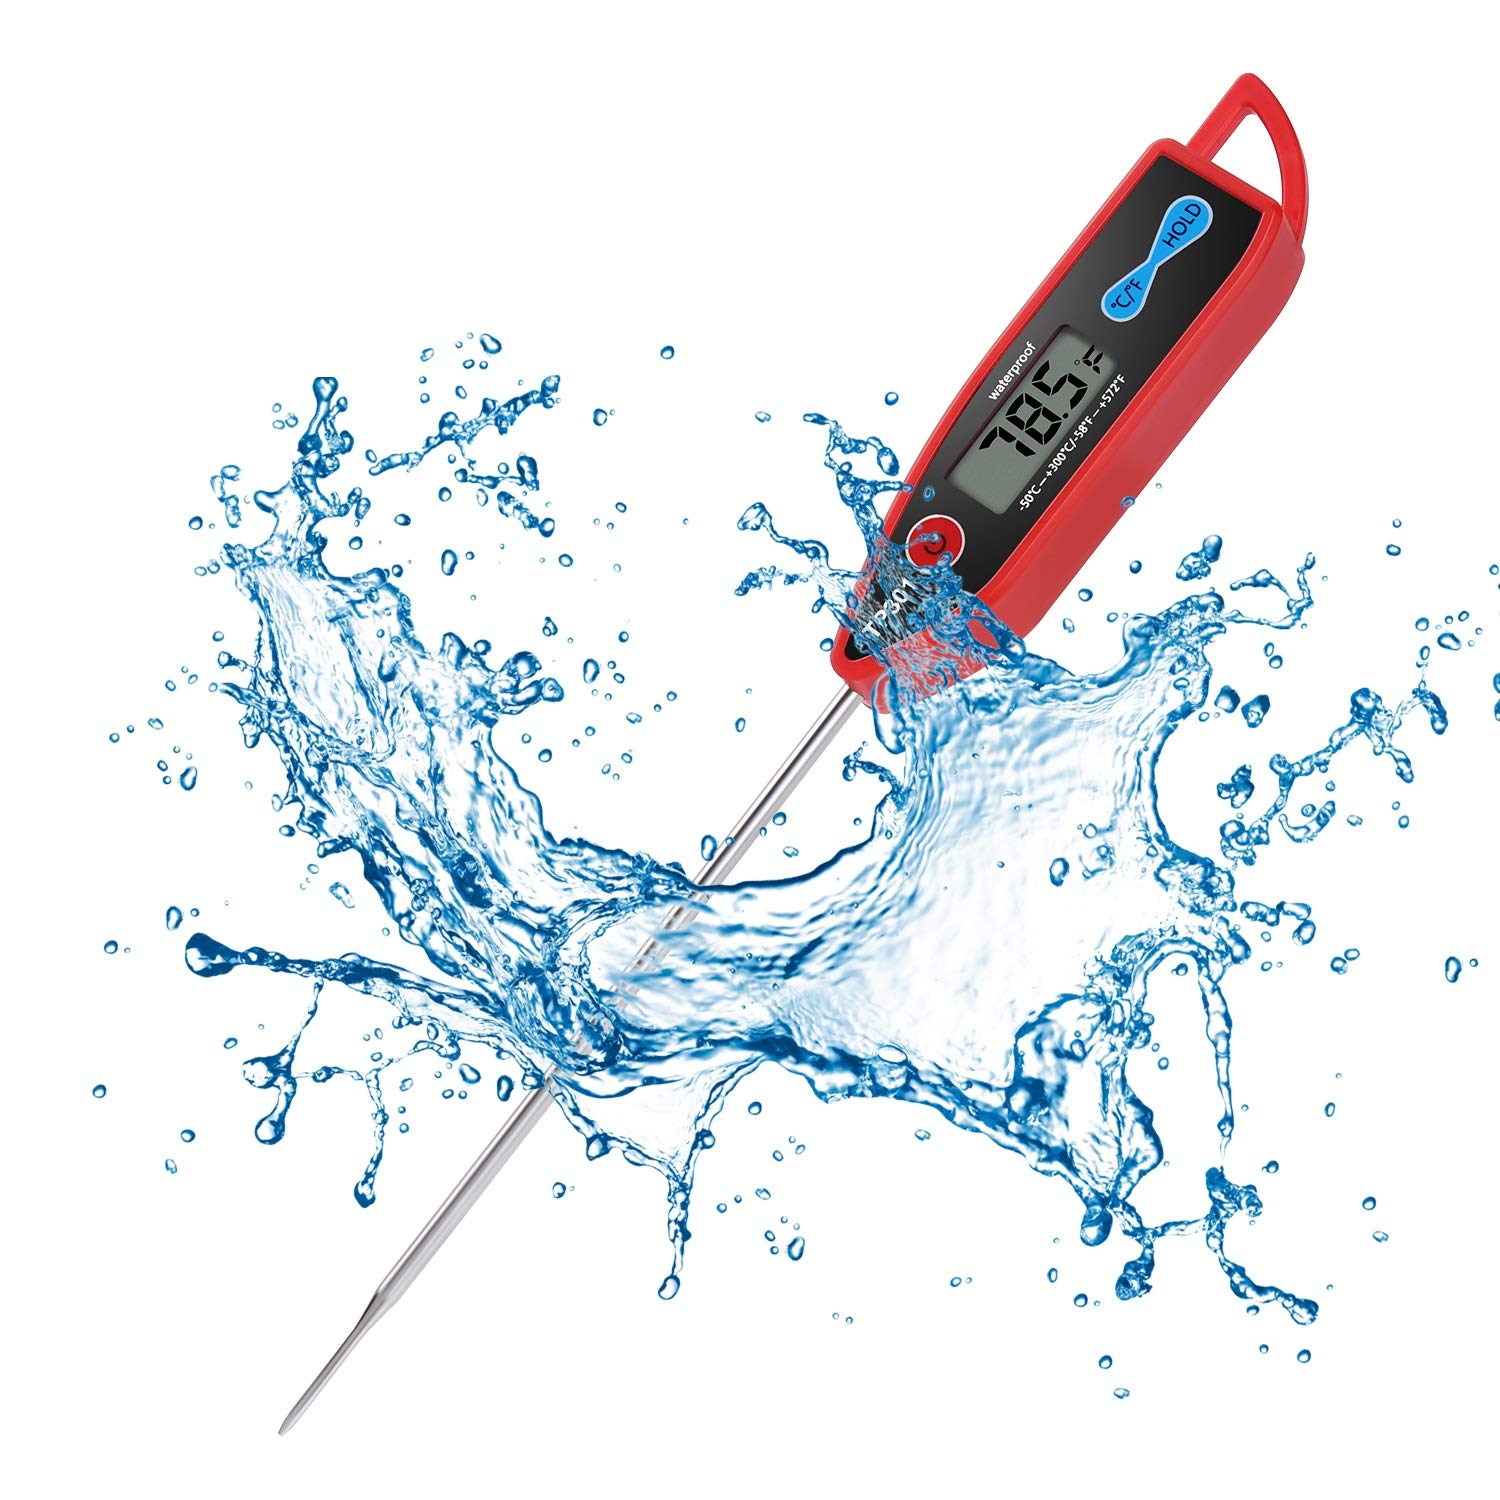 Digital Water Thermometer for Liquid, Candle, Instant Read with Waterproof for Food, Meat, Milk, Long Probe, White